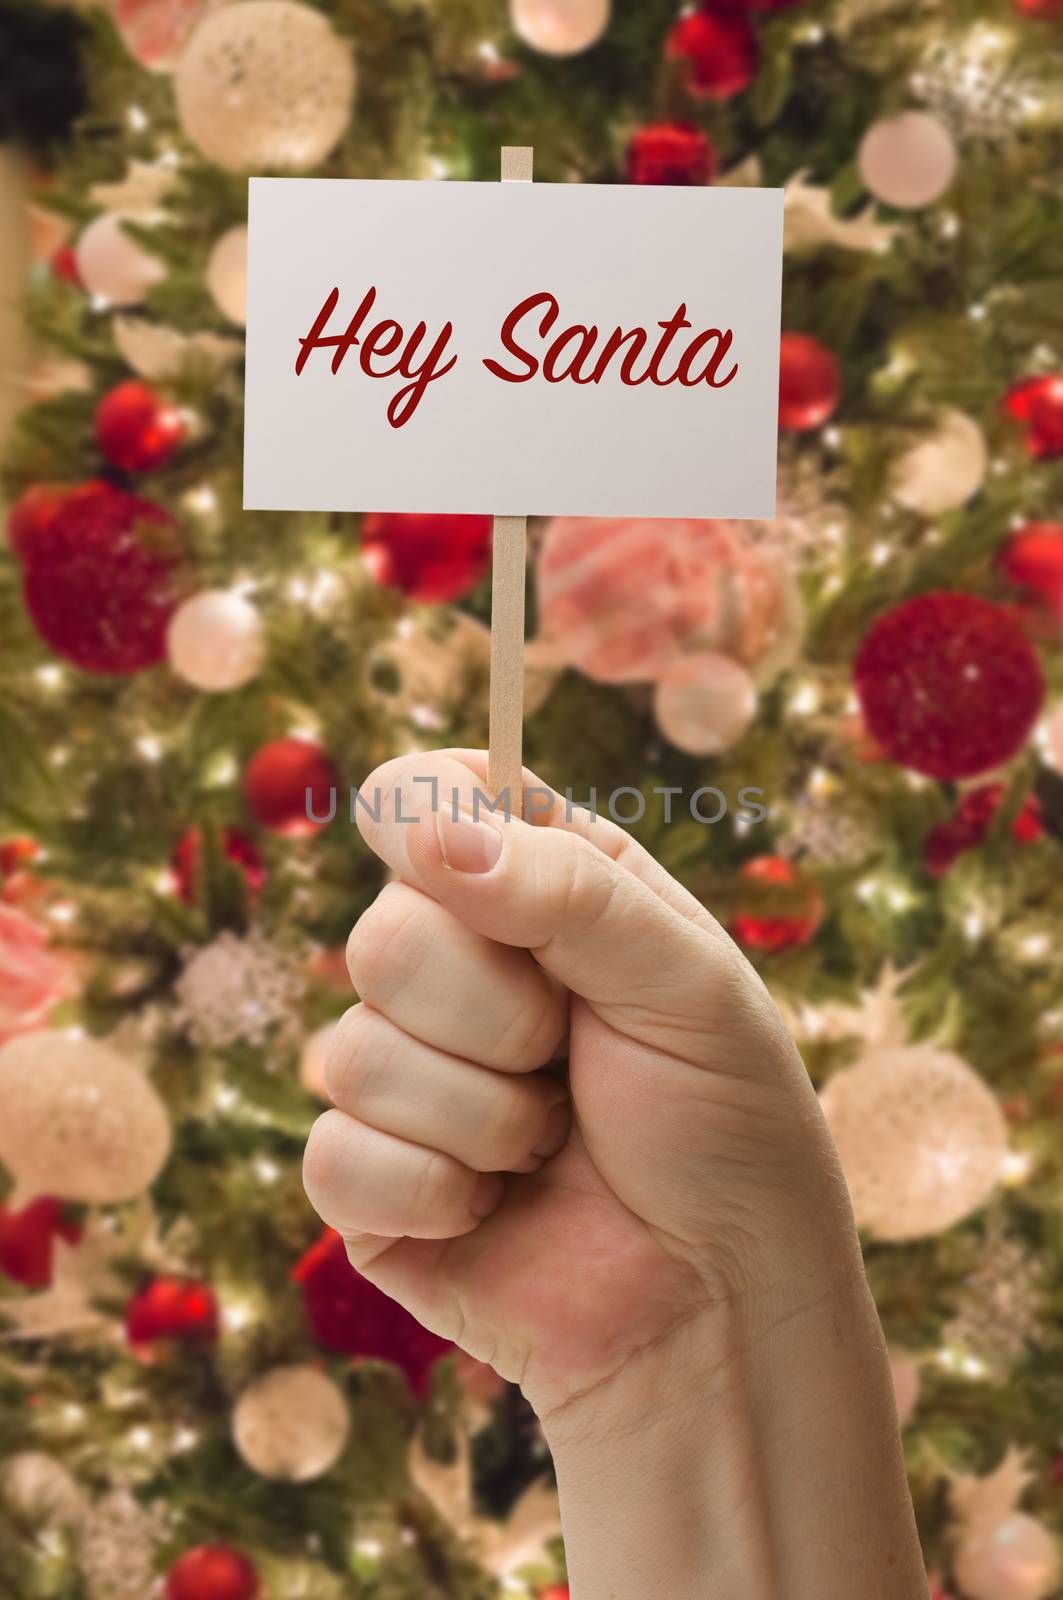 Hand Holding Hey Santa Card In Front of Decorated Christmas Tree.